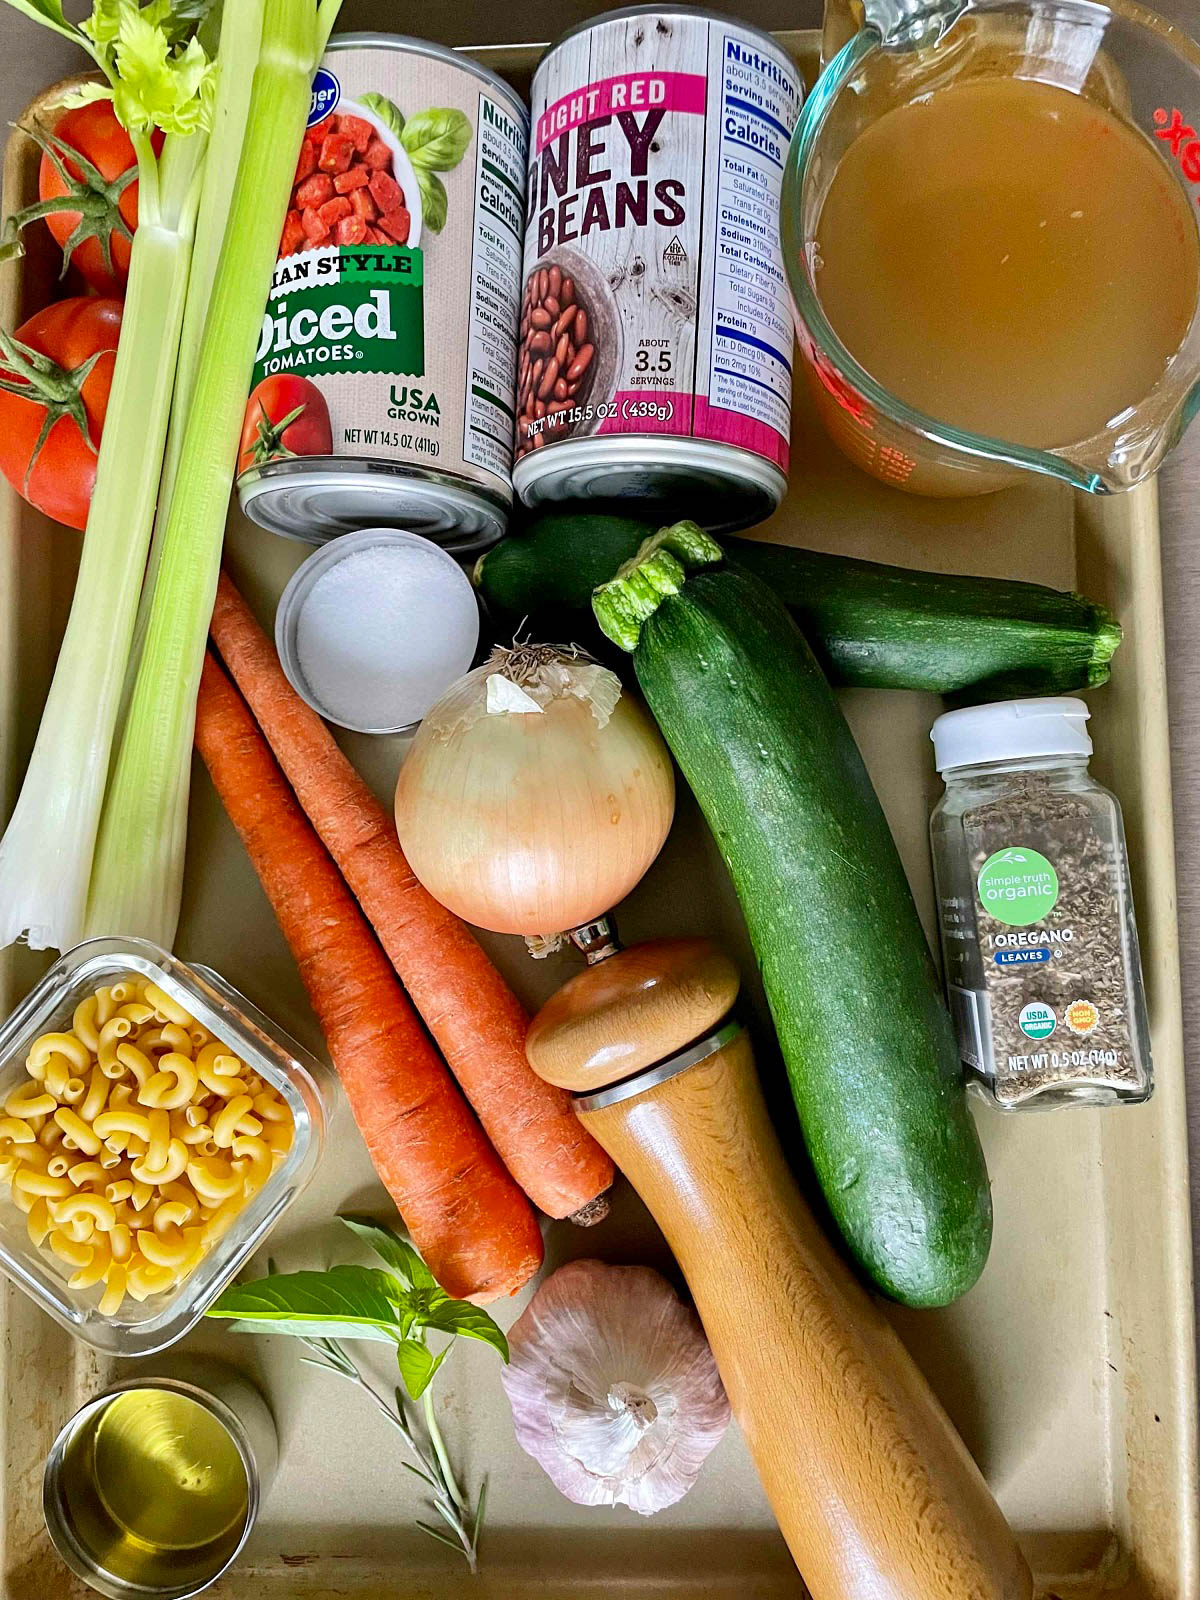 Ingredients_Minestrone-Soup on a metal tray - celery, tomatoes, broth, canned beans, spices, zucchini, onion, garlic, and carrots.